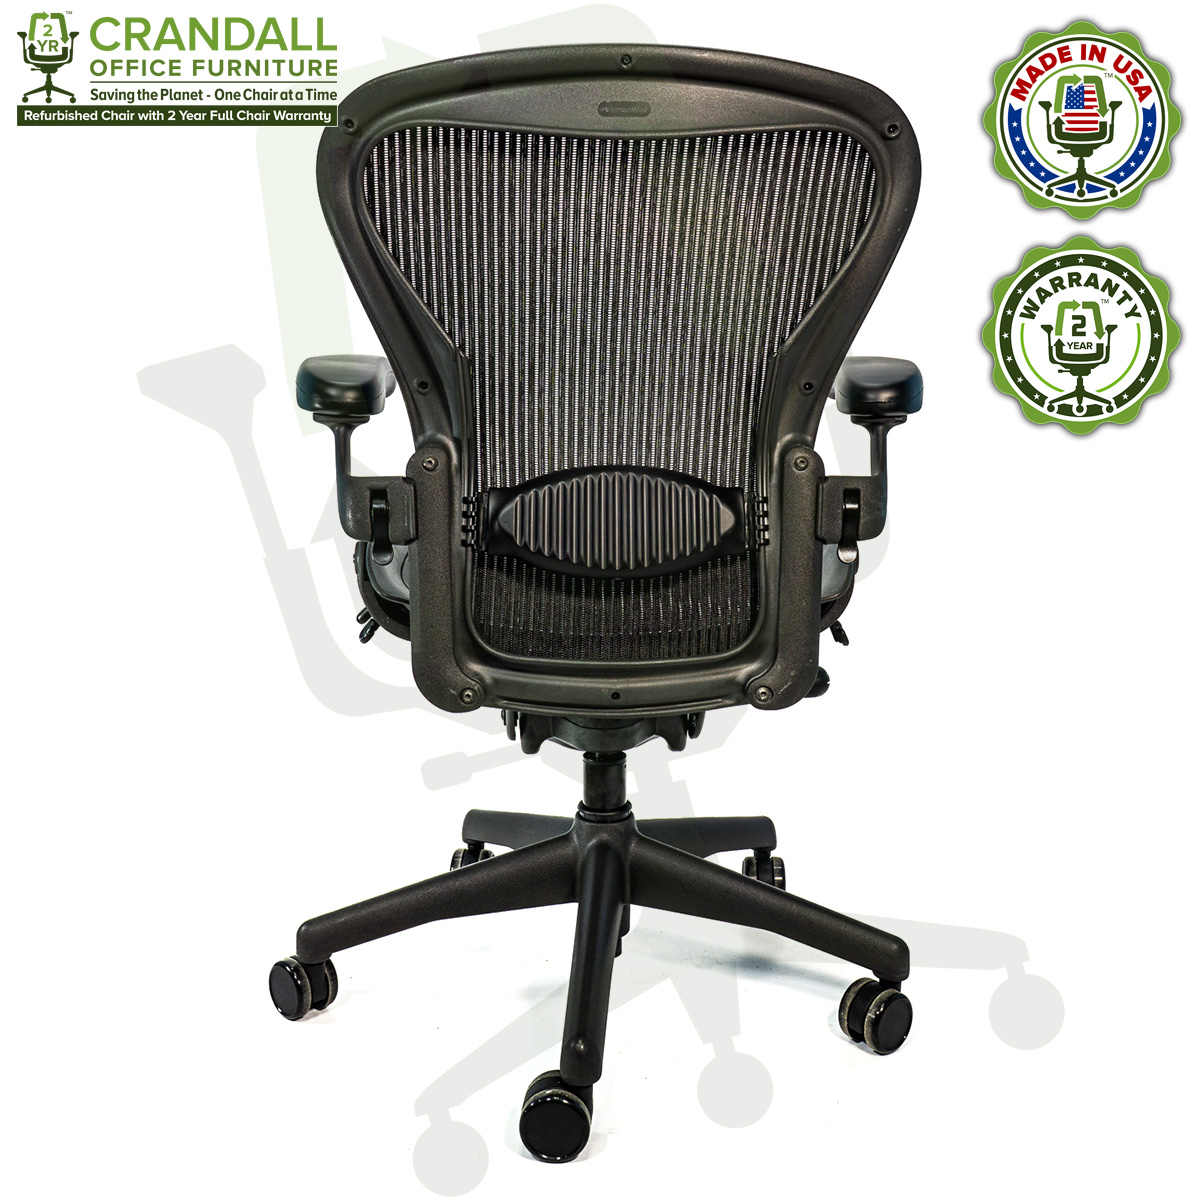 Crandall Office Furniture Refurbished Herman Miller Aeron Chair with 2 Year Warranty - 06